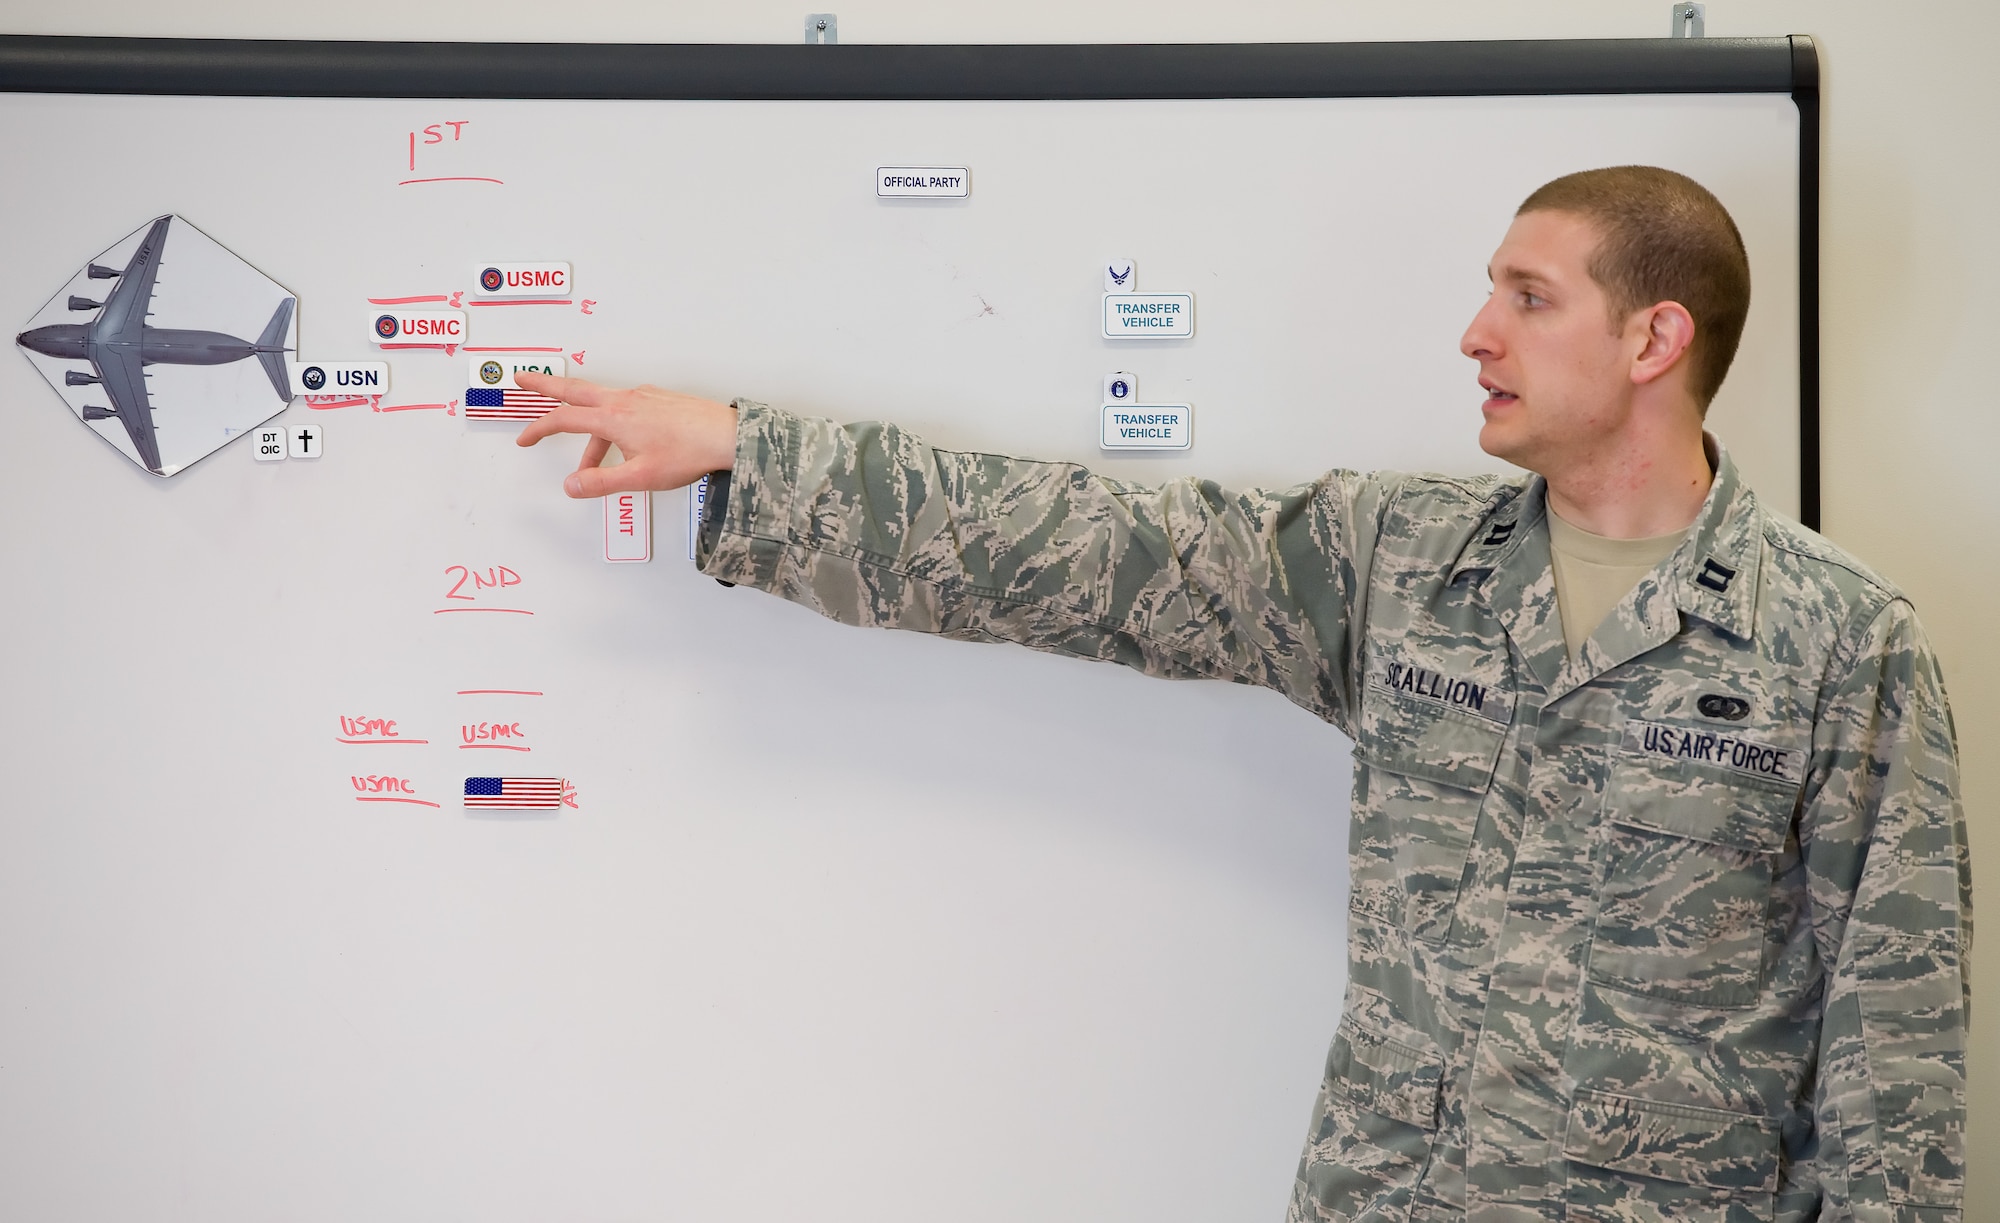 Capt. Brian Scallion, Air Force Mortuary Affairs Operations, dignified transfer officer in charge, briefs the transfer sequence to Folded Flag 2017 carry teams April 11, 2017, on Dover Air Force Base, Del. AFMAO held a joint service training exercise that tested its ability to respond to a mass casualty incident. (U.S. Air Force photo by Roland Balik)